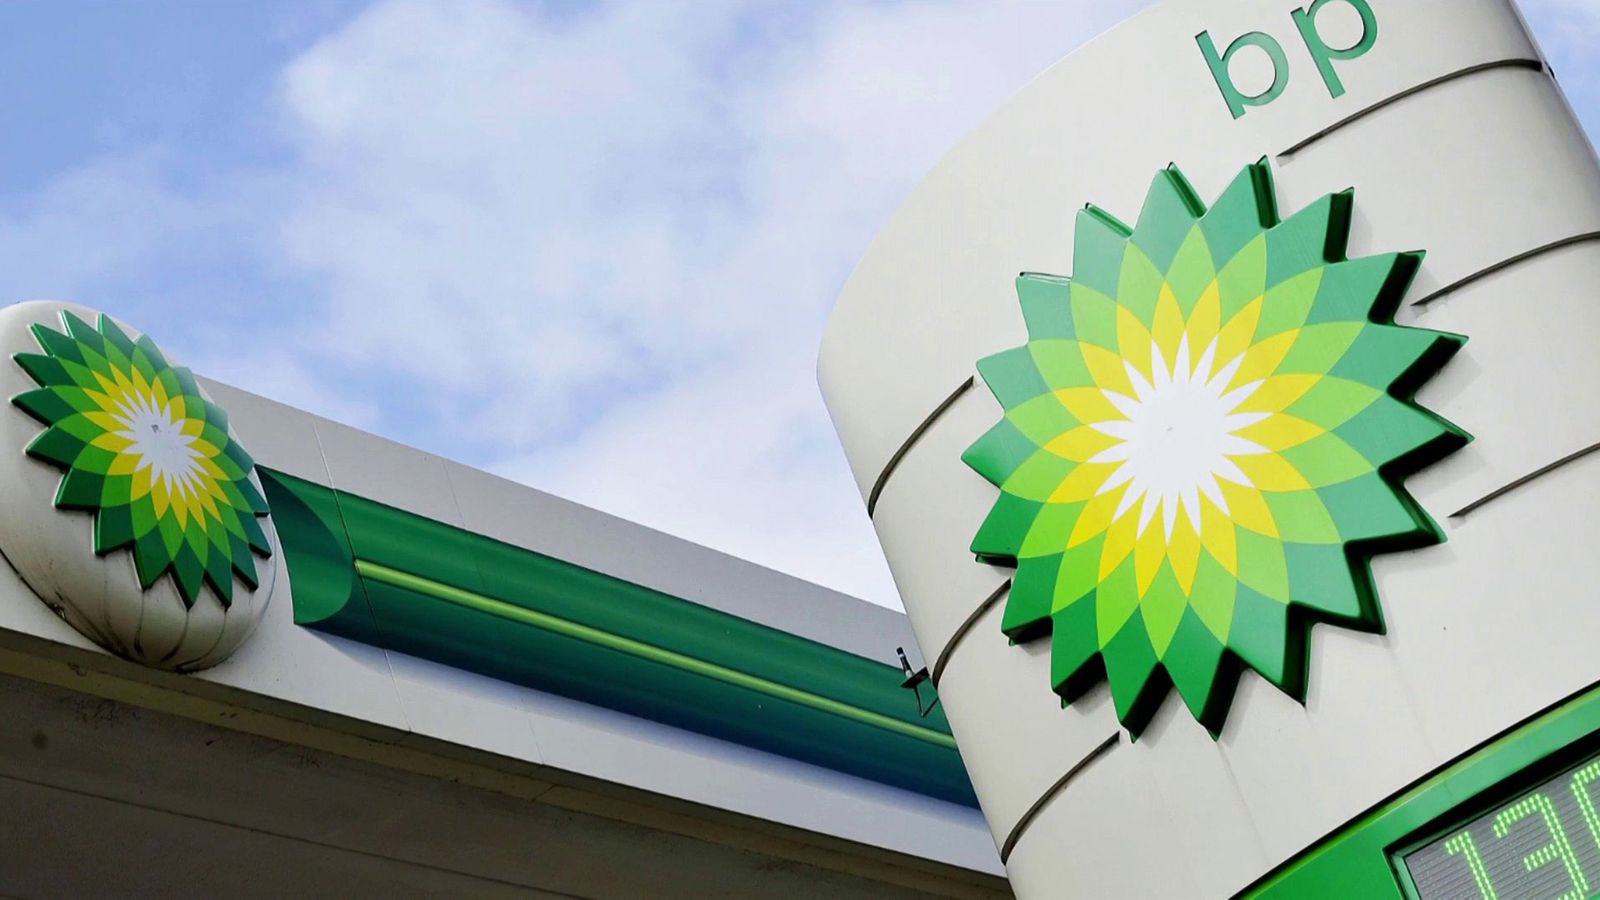 Net profits of £2bn for BP between April and June - but it's a sharp fall from the year before